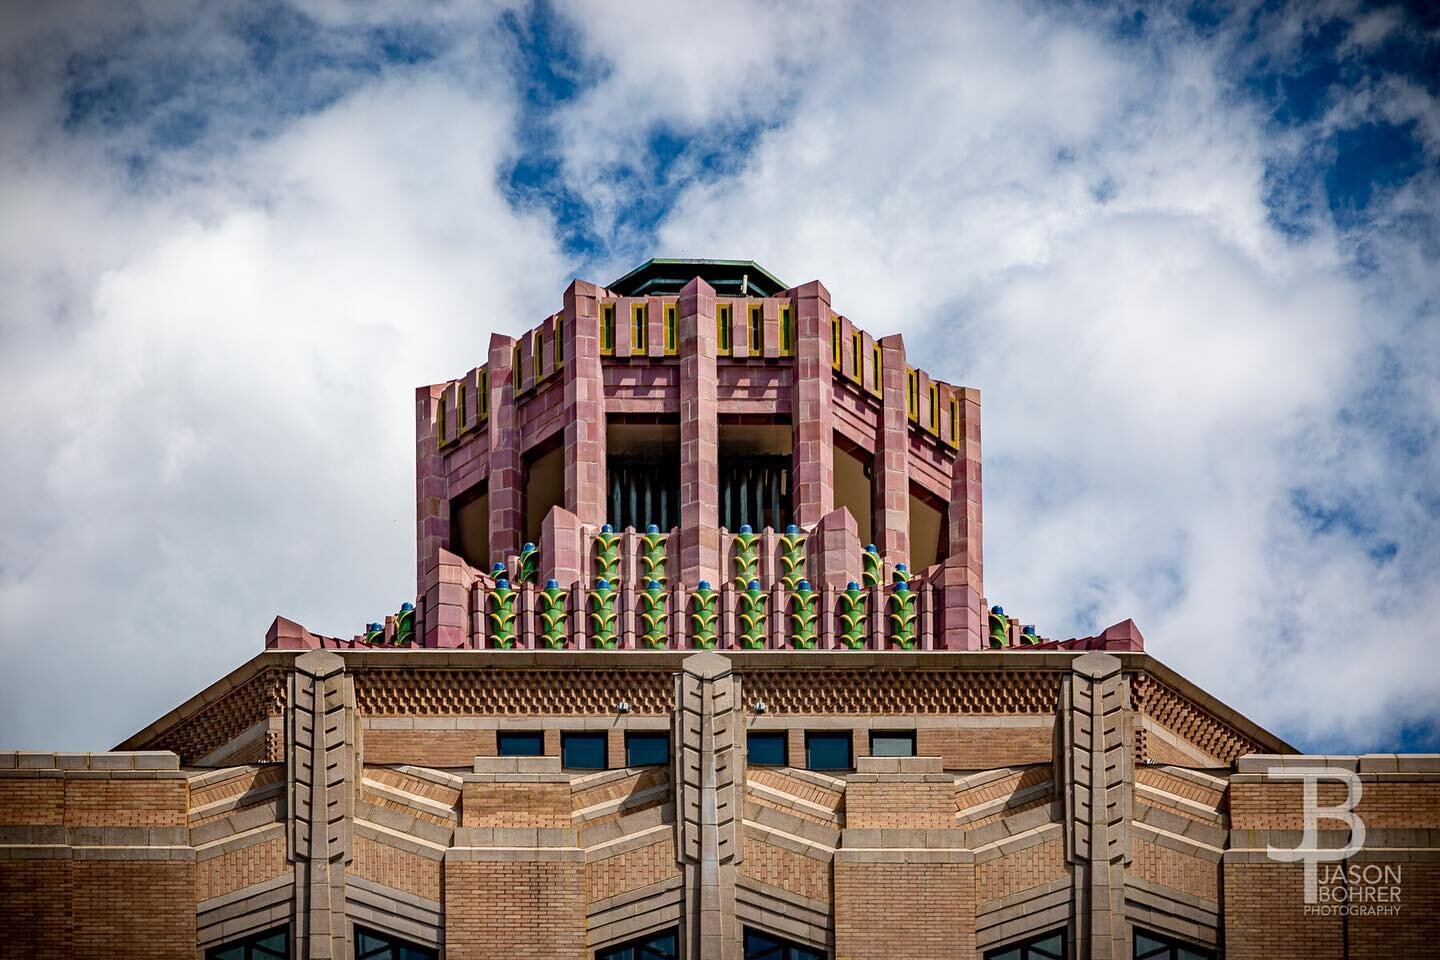 The Art Deco design of the City Building in Asheville, NC.